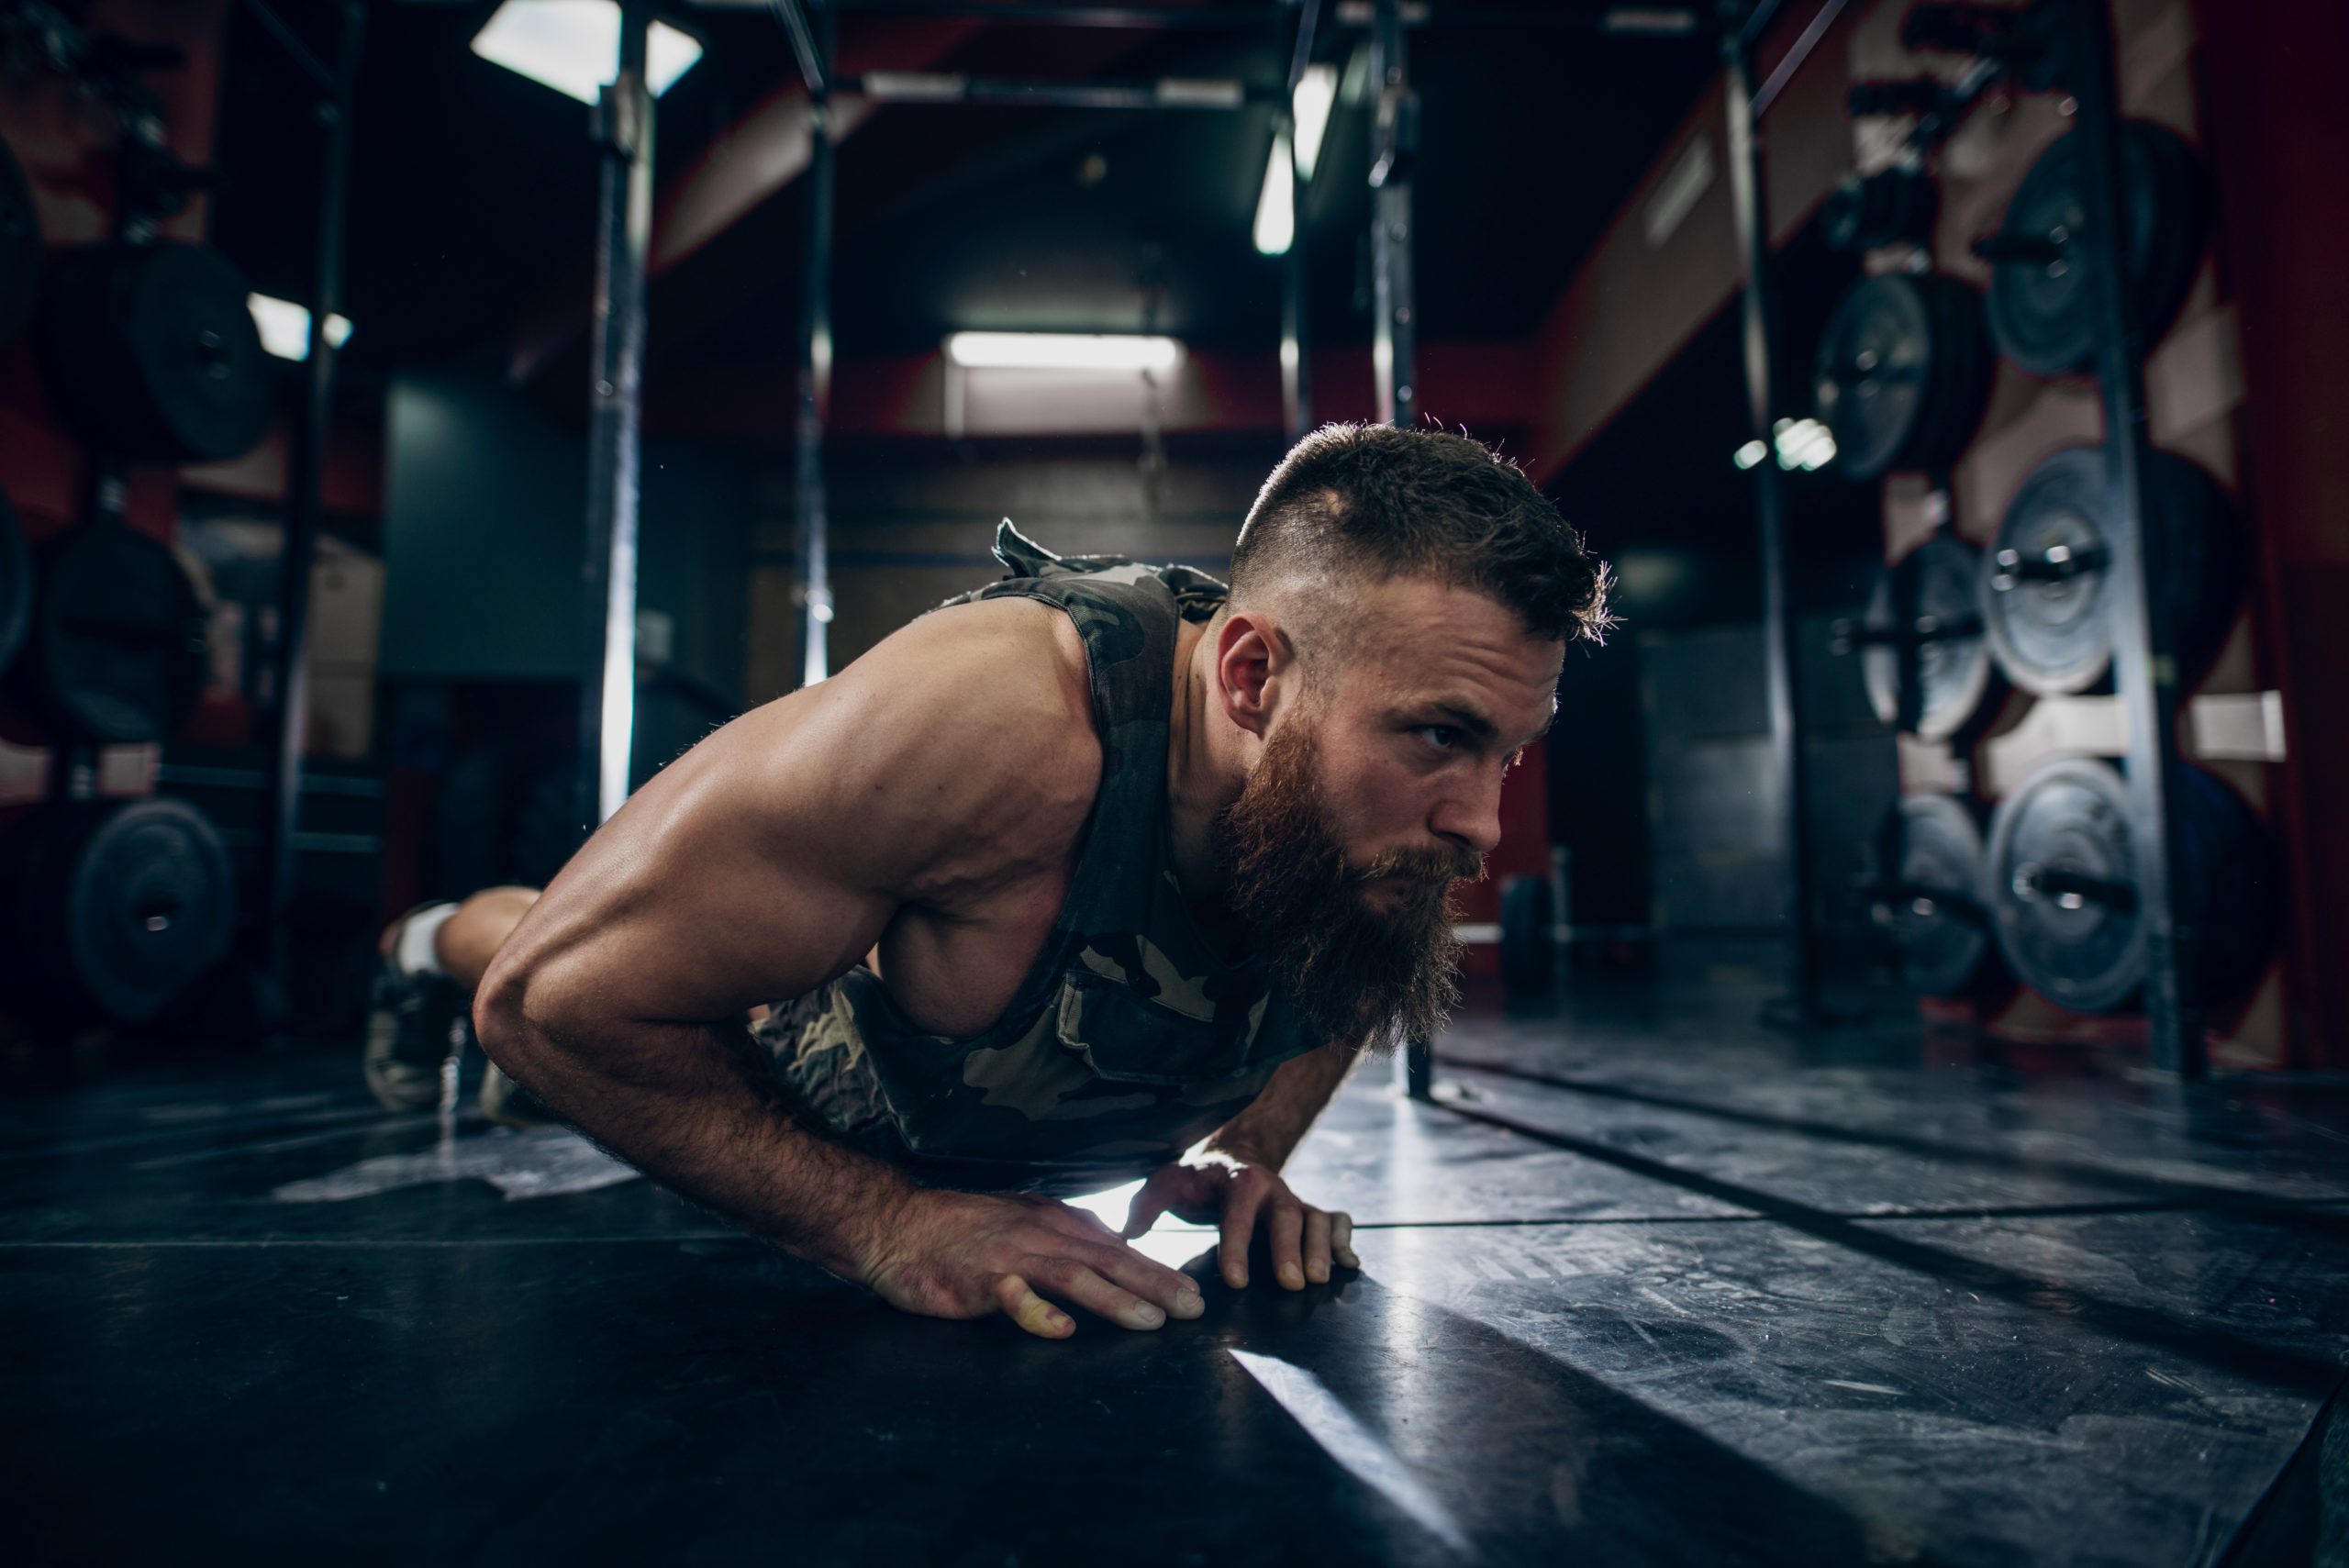 Muscular man doing push-ups in military style weighted vest in gym. Weight plates in background.